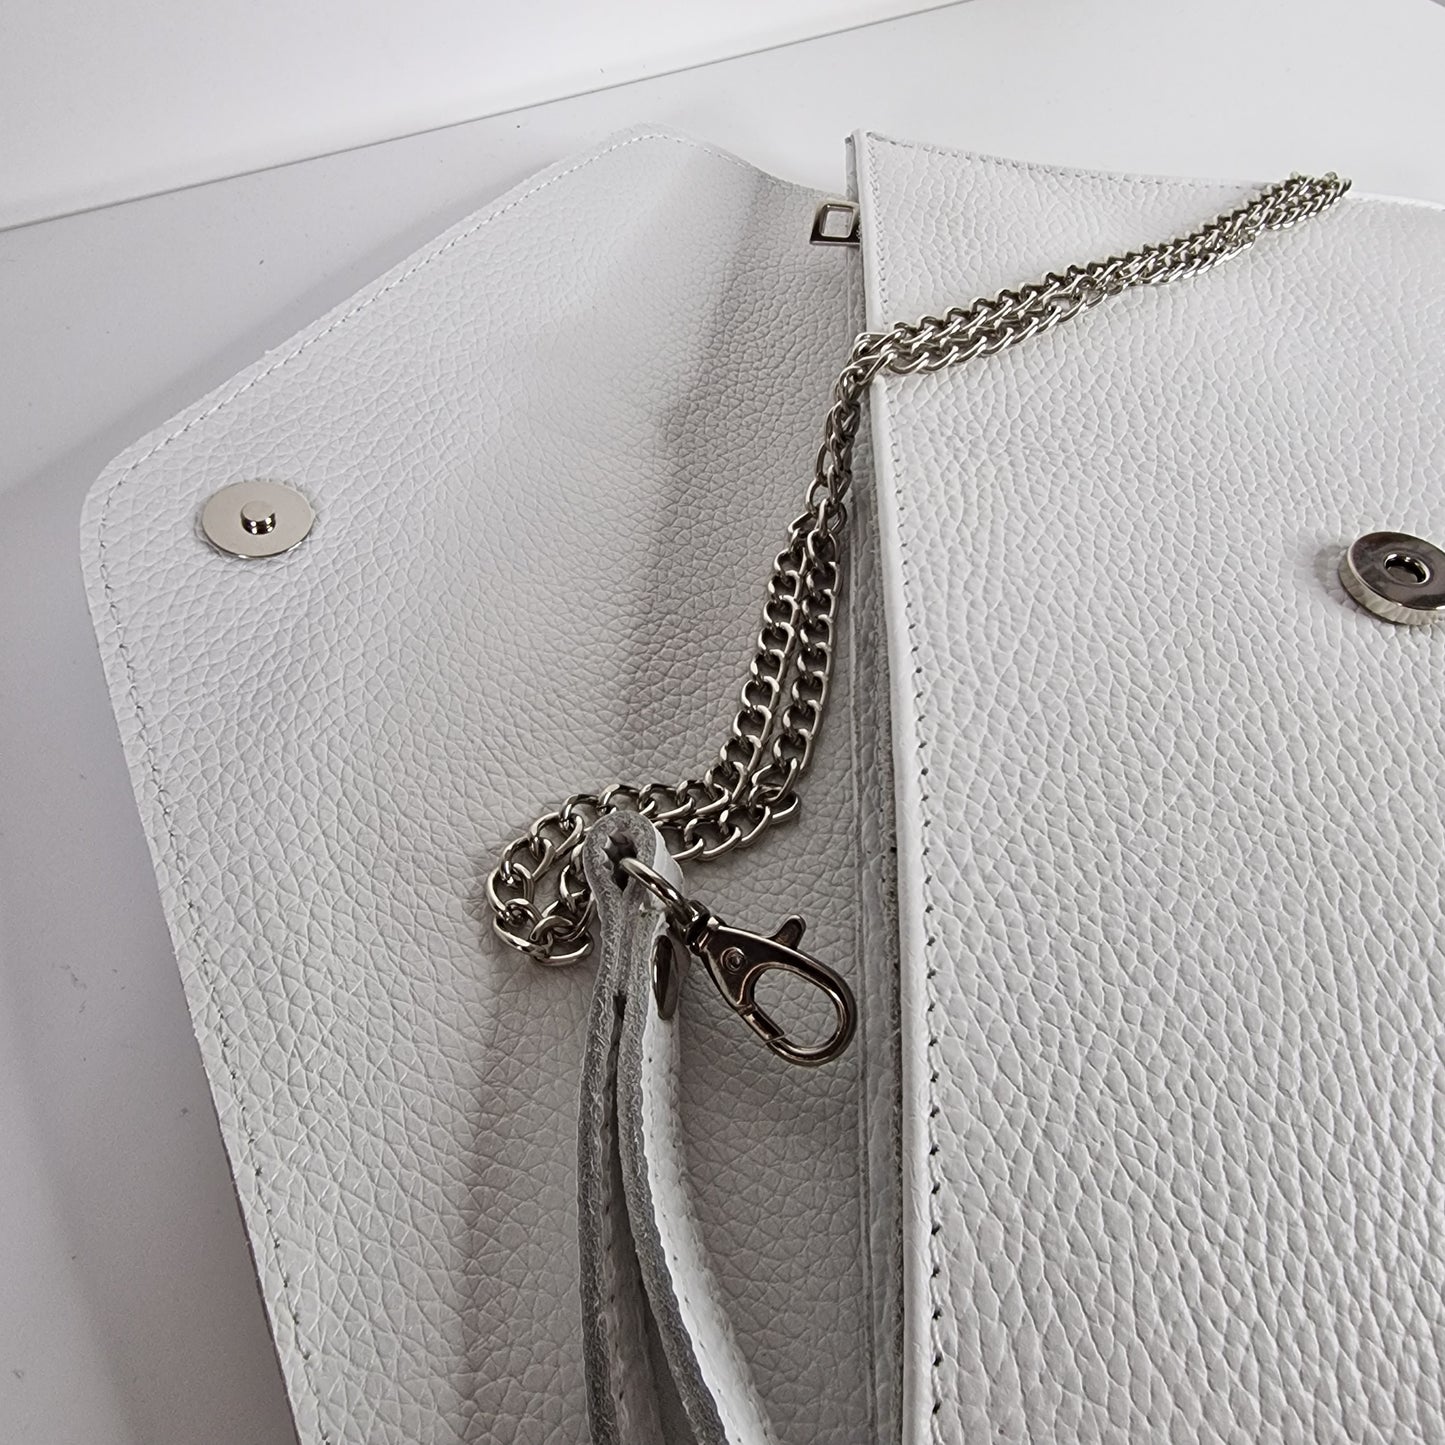 White Genuine Pebbled Leather Envelope Clutch